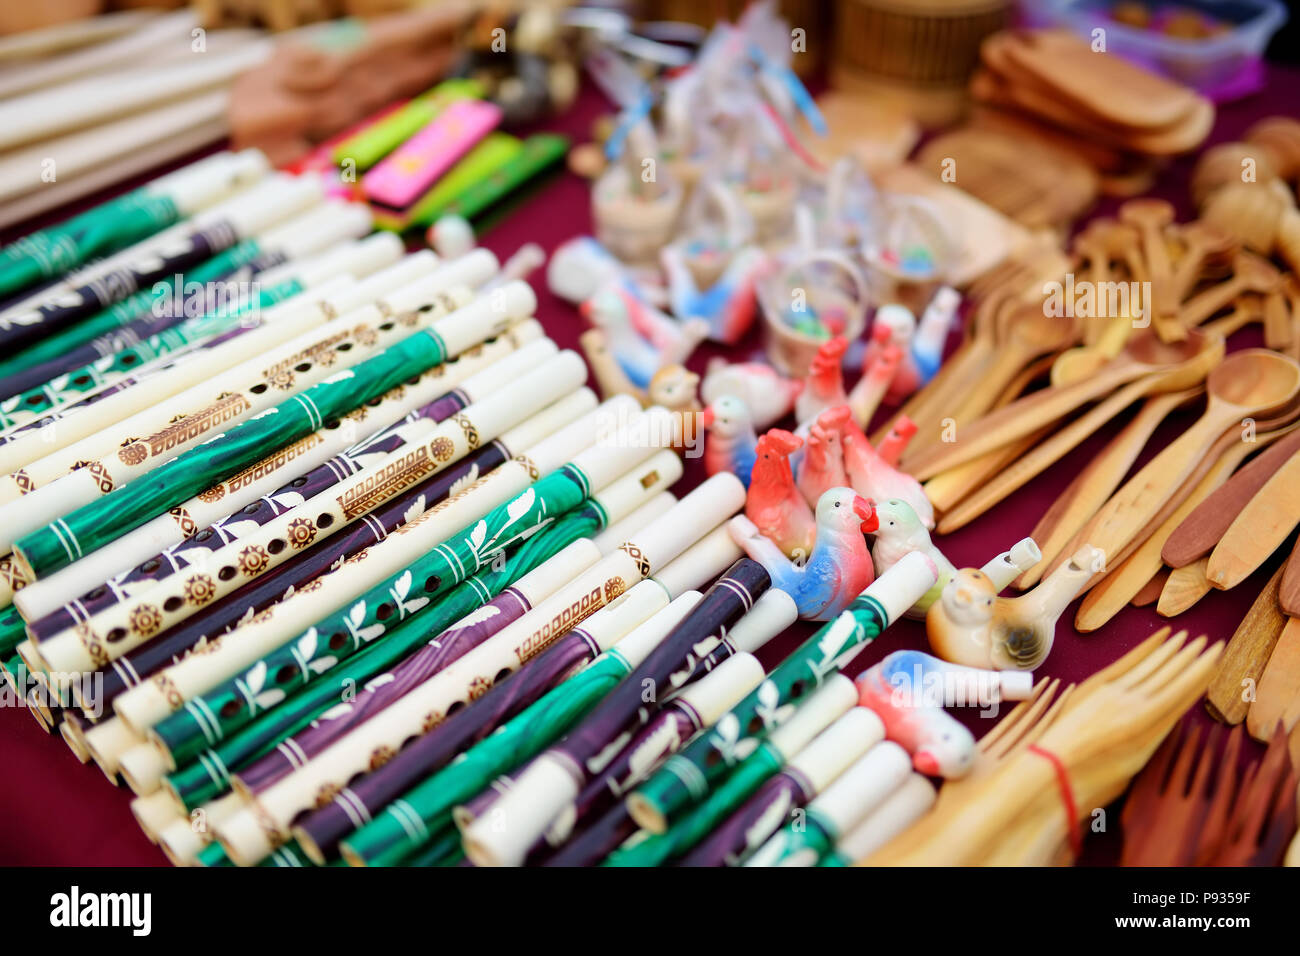 Ceramic whistles and wooden pipes sold on Easter market in Vilnius. Lithuanian capital's annual traditional crafts fair is held every March on Old Tow Stock Photo